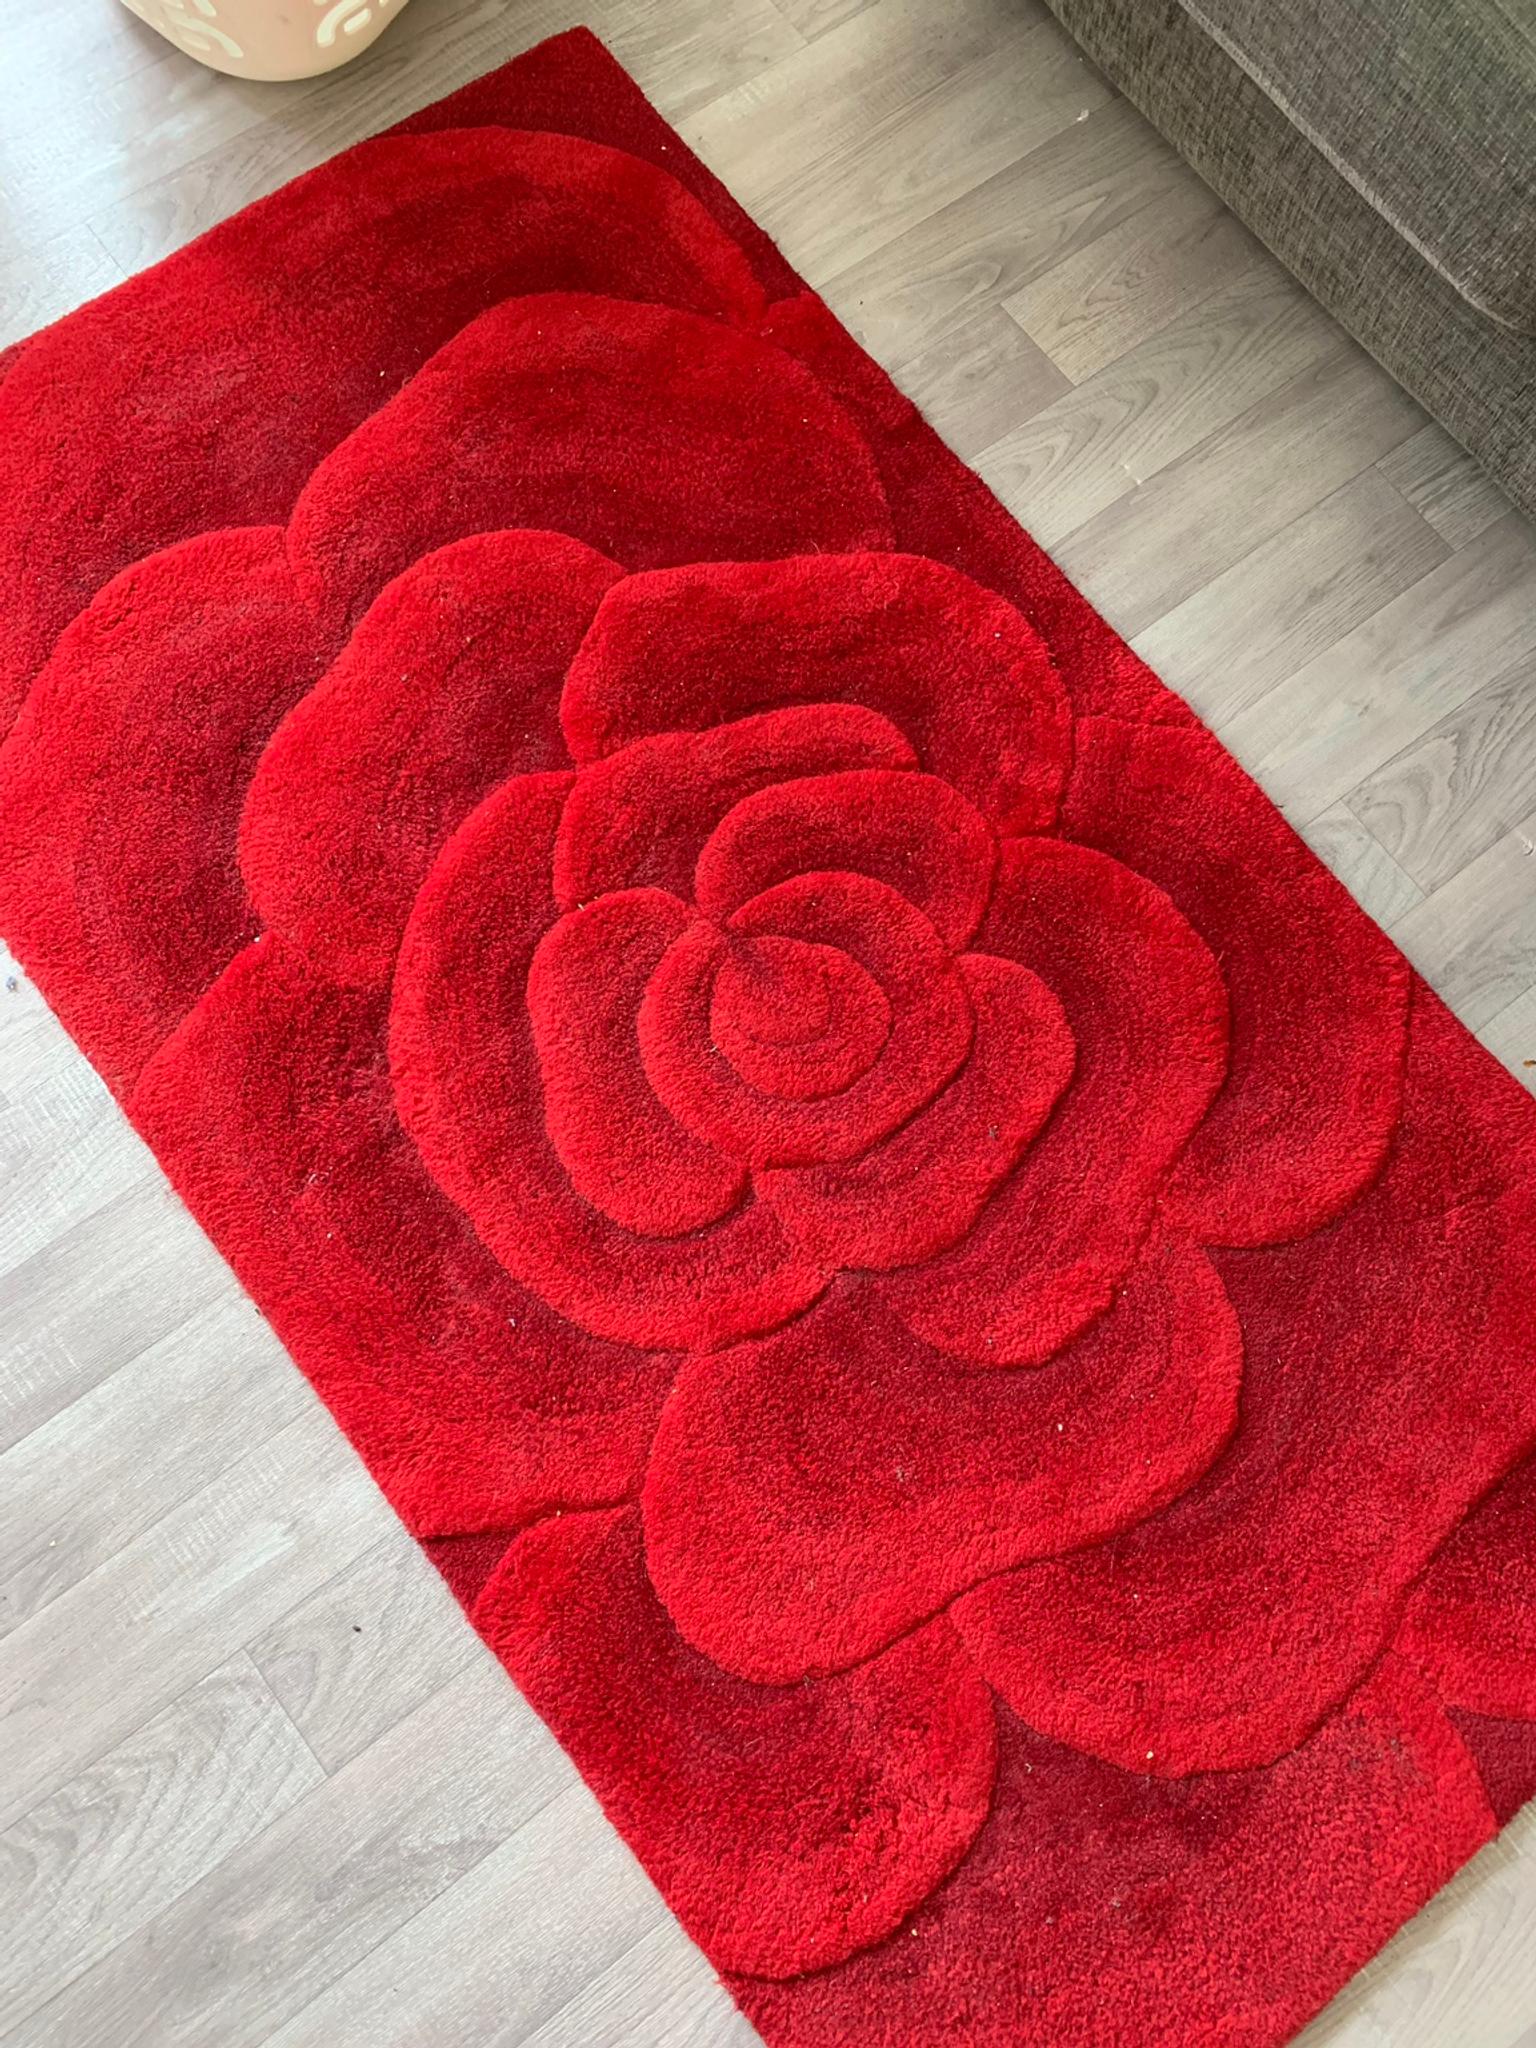 Large Red Rug In S44 North East, Red Rose Rug